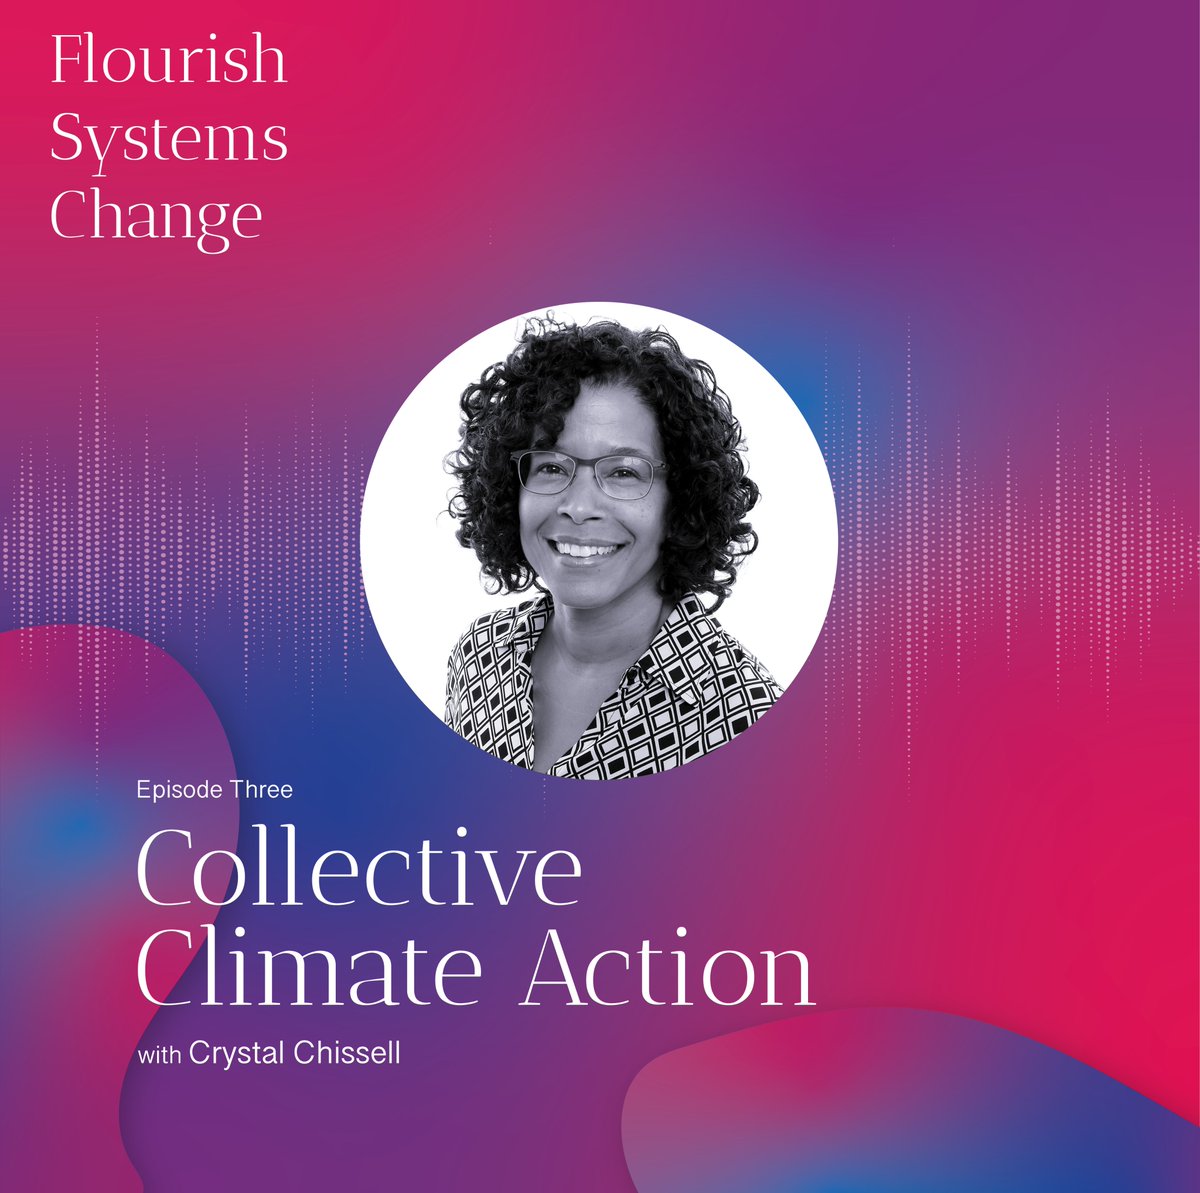 🔊Ep 3 of Flourish Systems Change features #climateaction leader @CrystalChissell of @ProjectDrawdown 👂flourish-book.com/flourishsystem… or your fave platform 🌱Jointly conceived + co-presented by @michaelpawlyn + @sarah_ichioka 🌟Podcast supported by @InterfaceInc #possibilism #agency